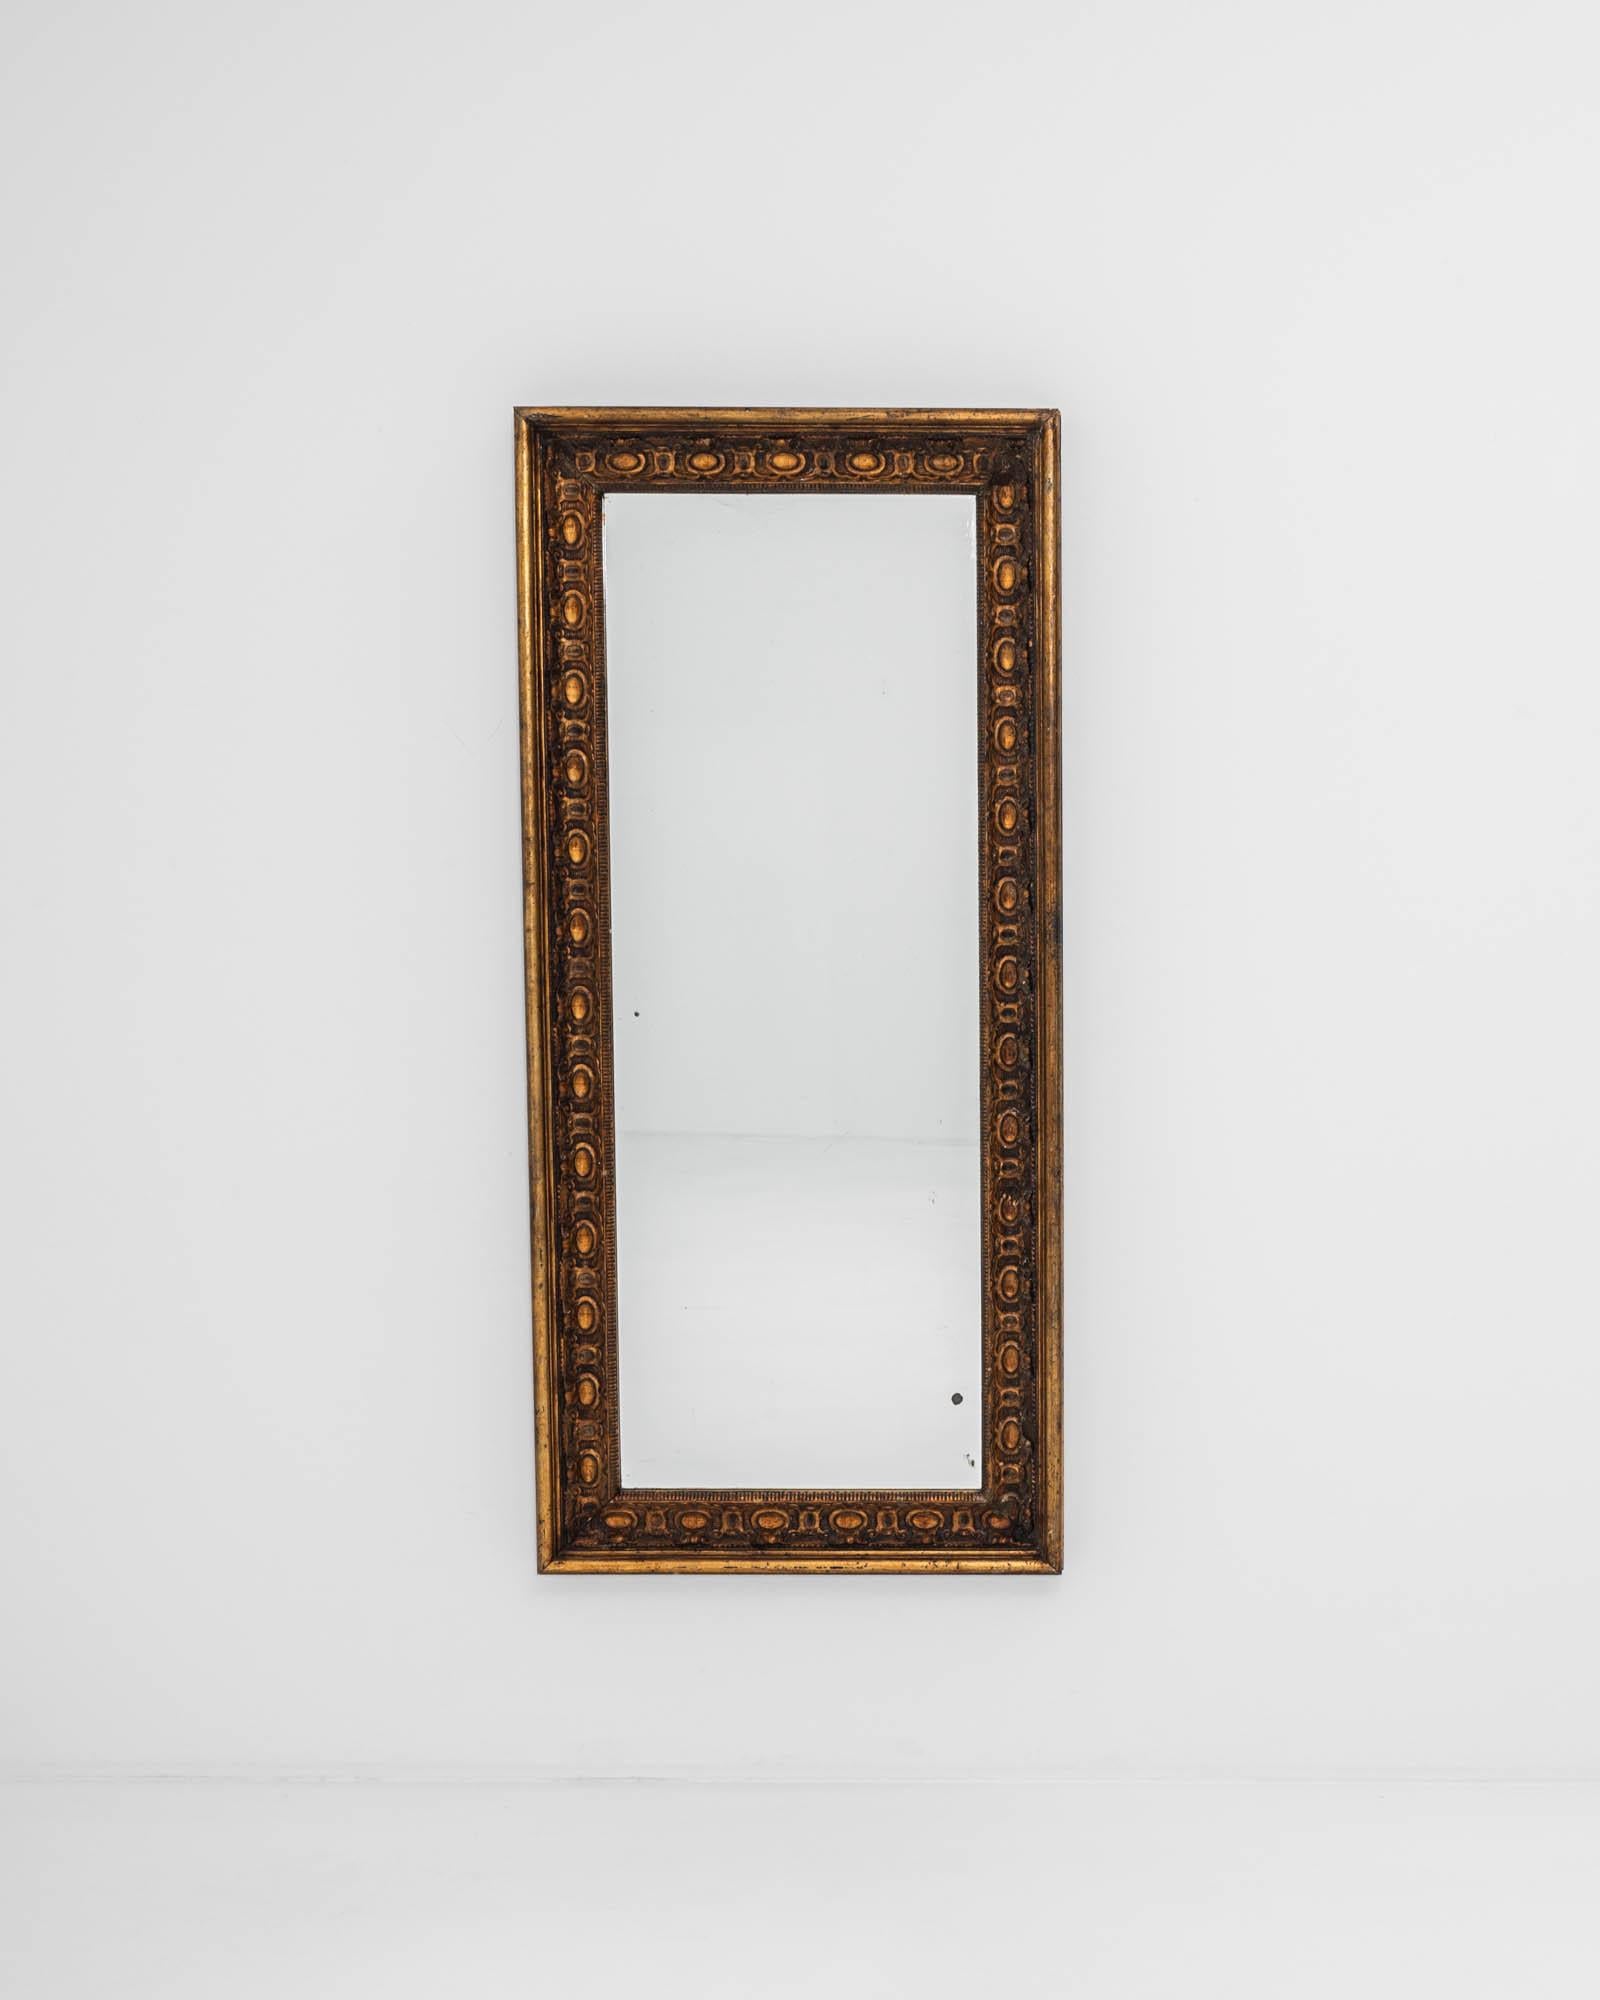 A wooden mirror created in 19th century France. Proudly aged, the paint has worn to a rich patina, blending darks tones and golden browns that shine in accord with a patinated gold leaf around the patterned frame. This one of a kind mirror combines